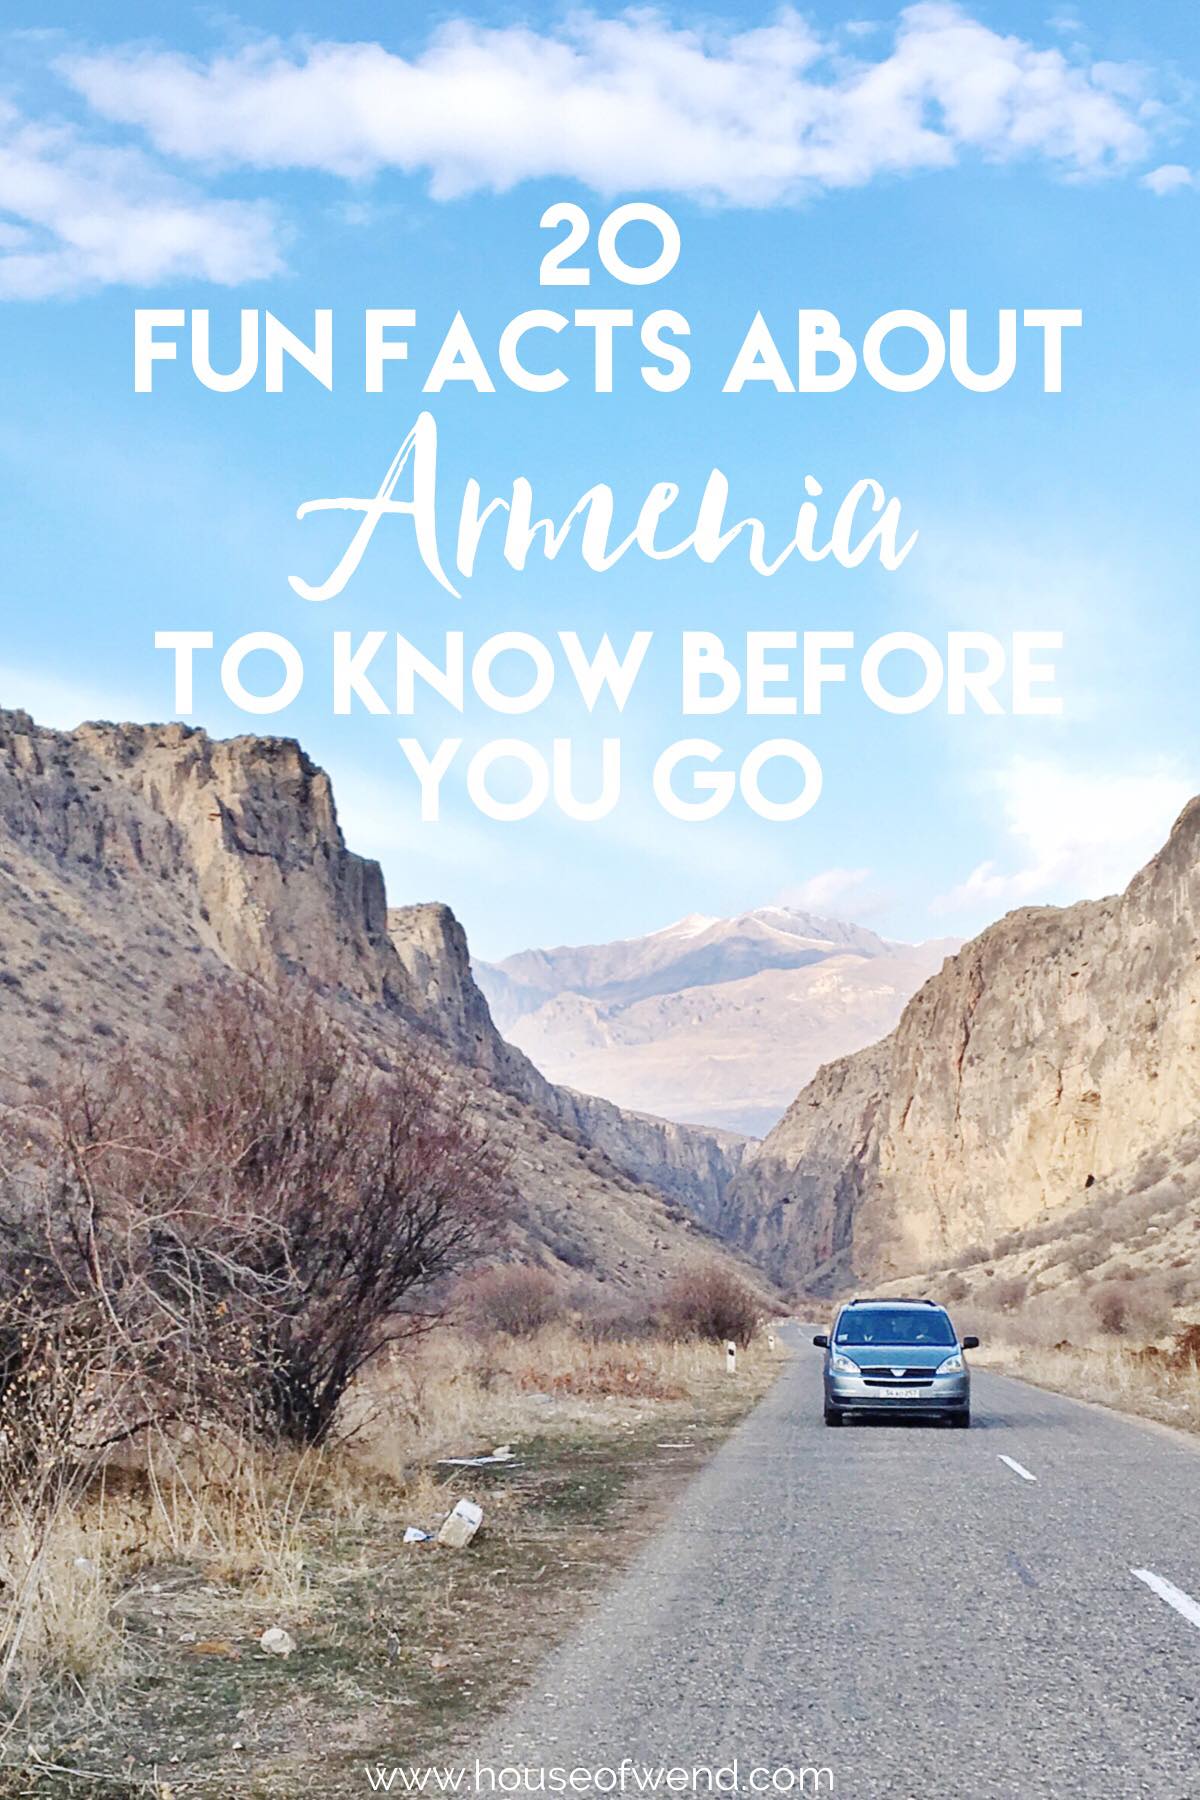 20 Fun Facts About Armenia to Know Before You Go